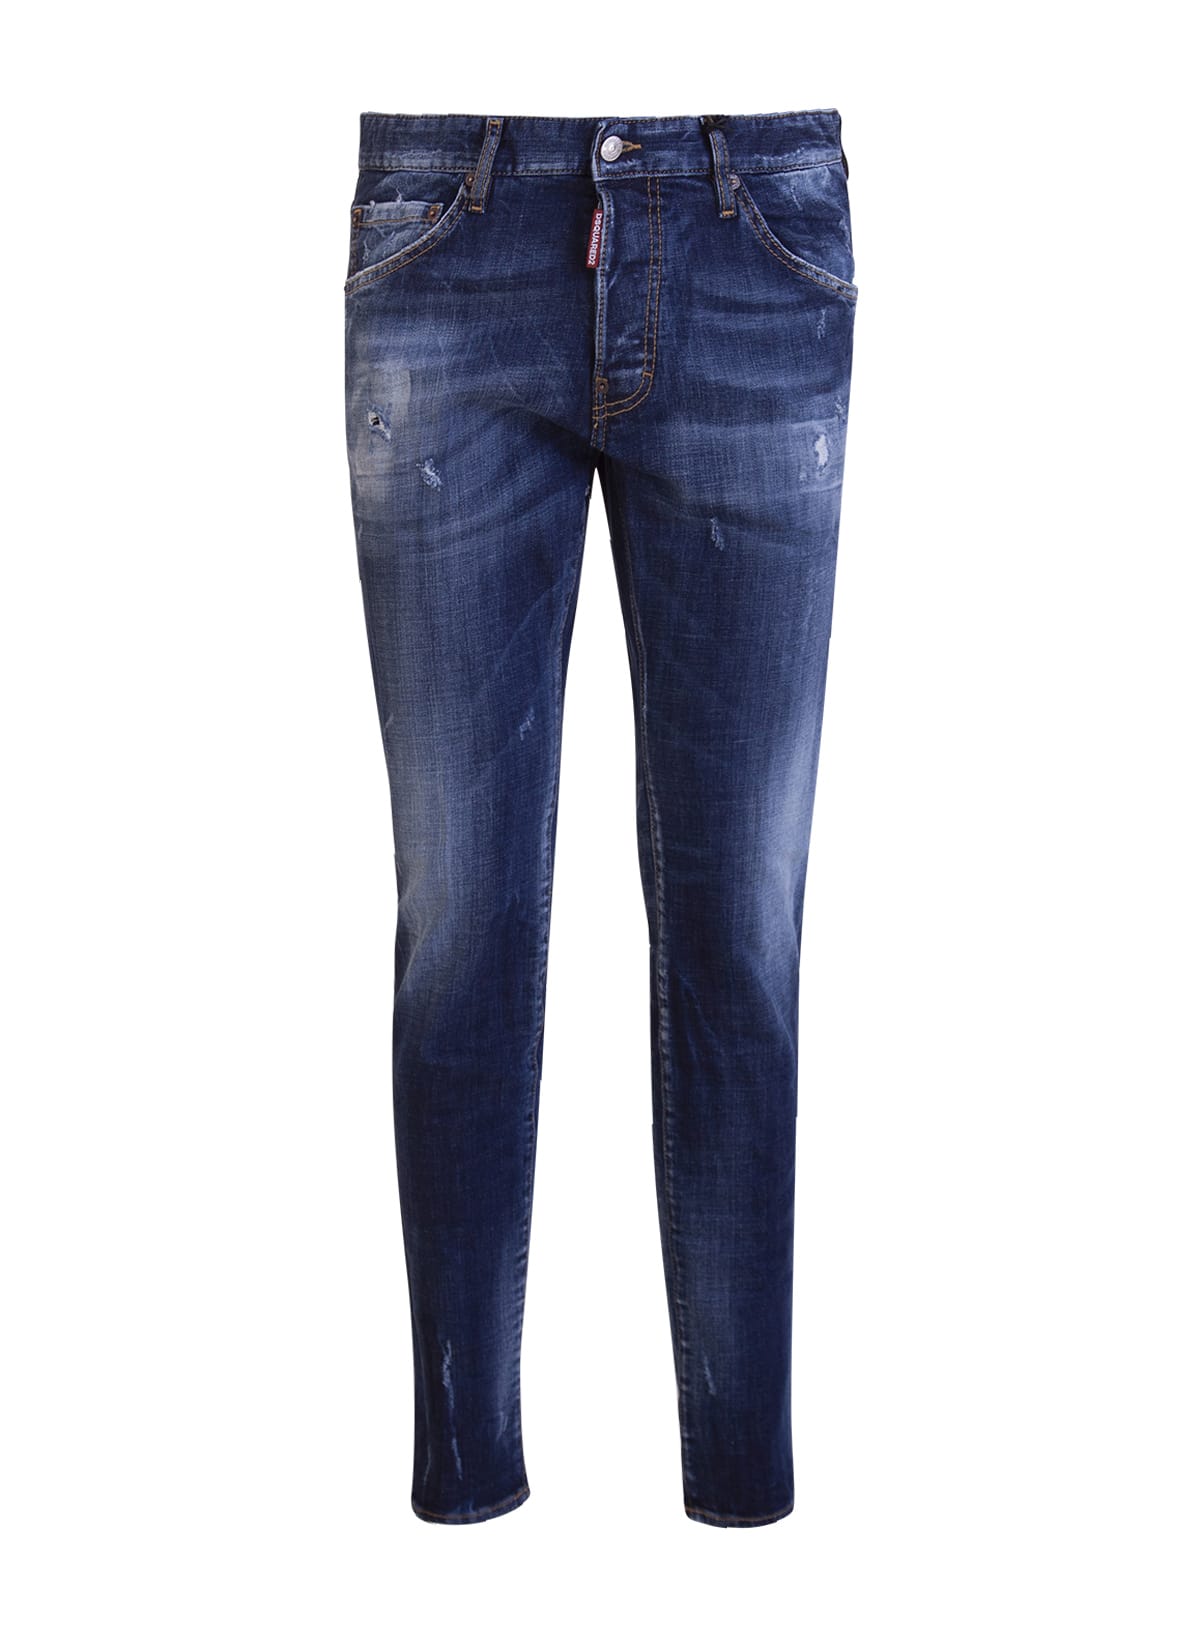 Dsquared2 Cool Guy Distressed Jeans